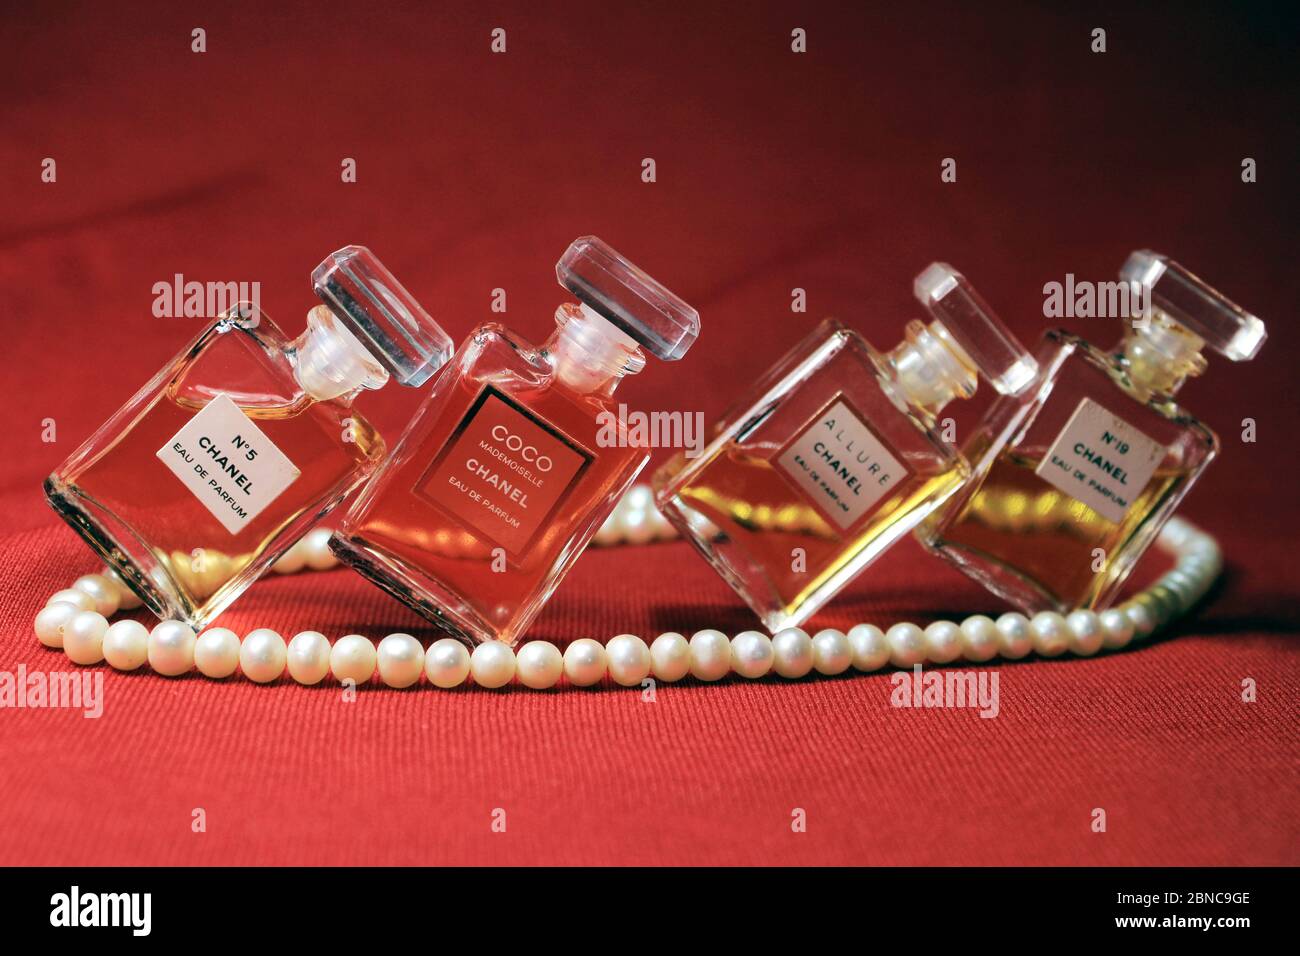 Kolkata, India on 13th May in 2020 : Chanel perfume bottles isolated on red background. Bottles with different Chanel perfume products. Stock Photo